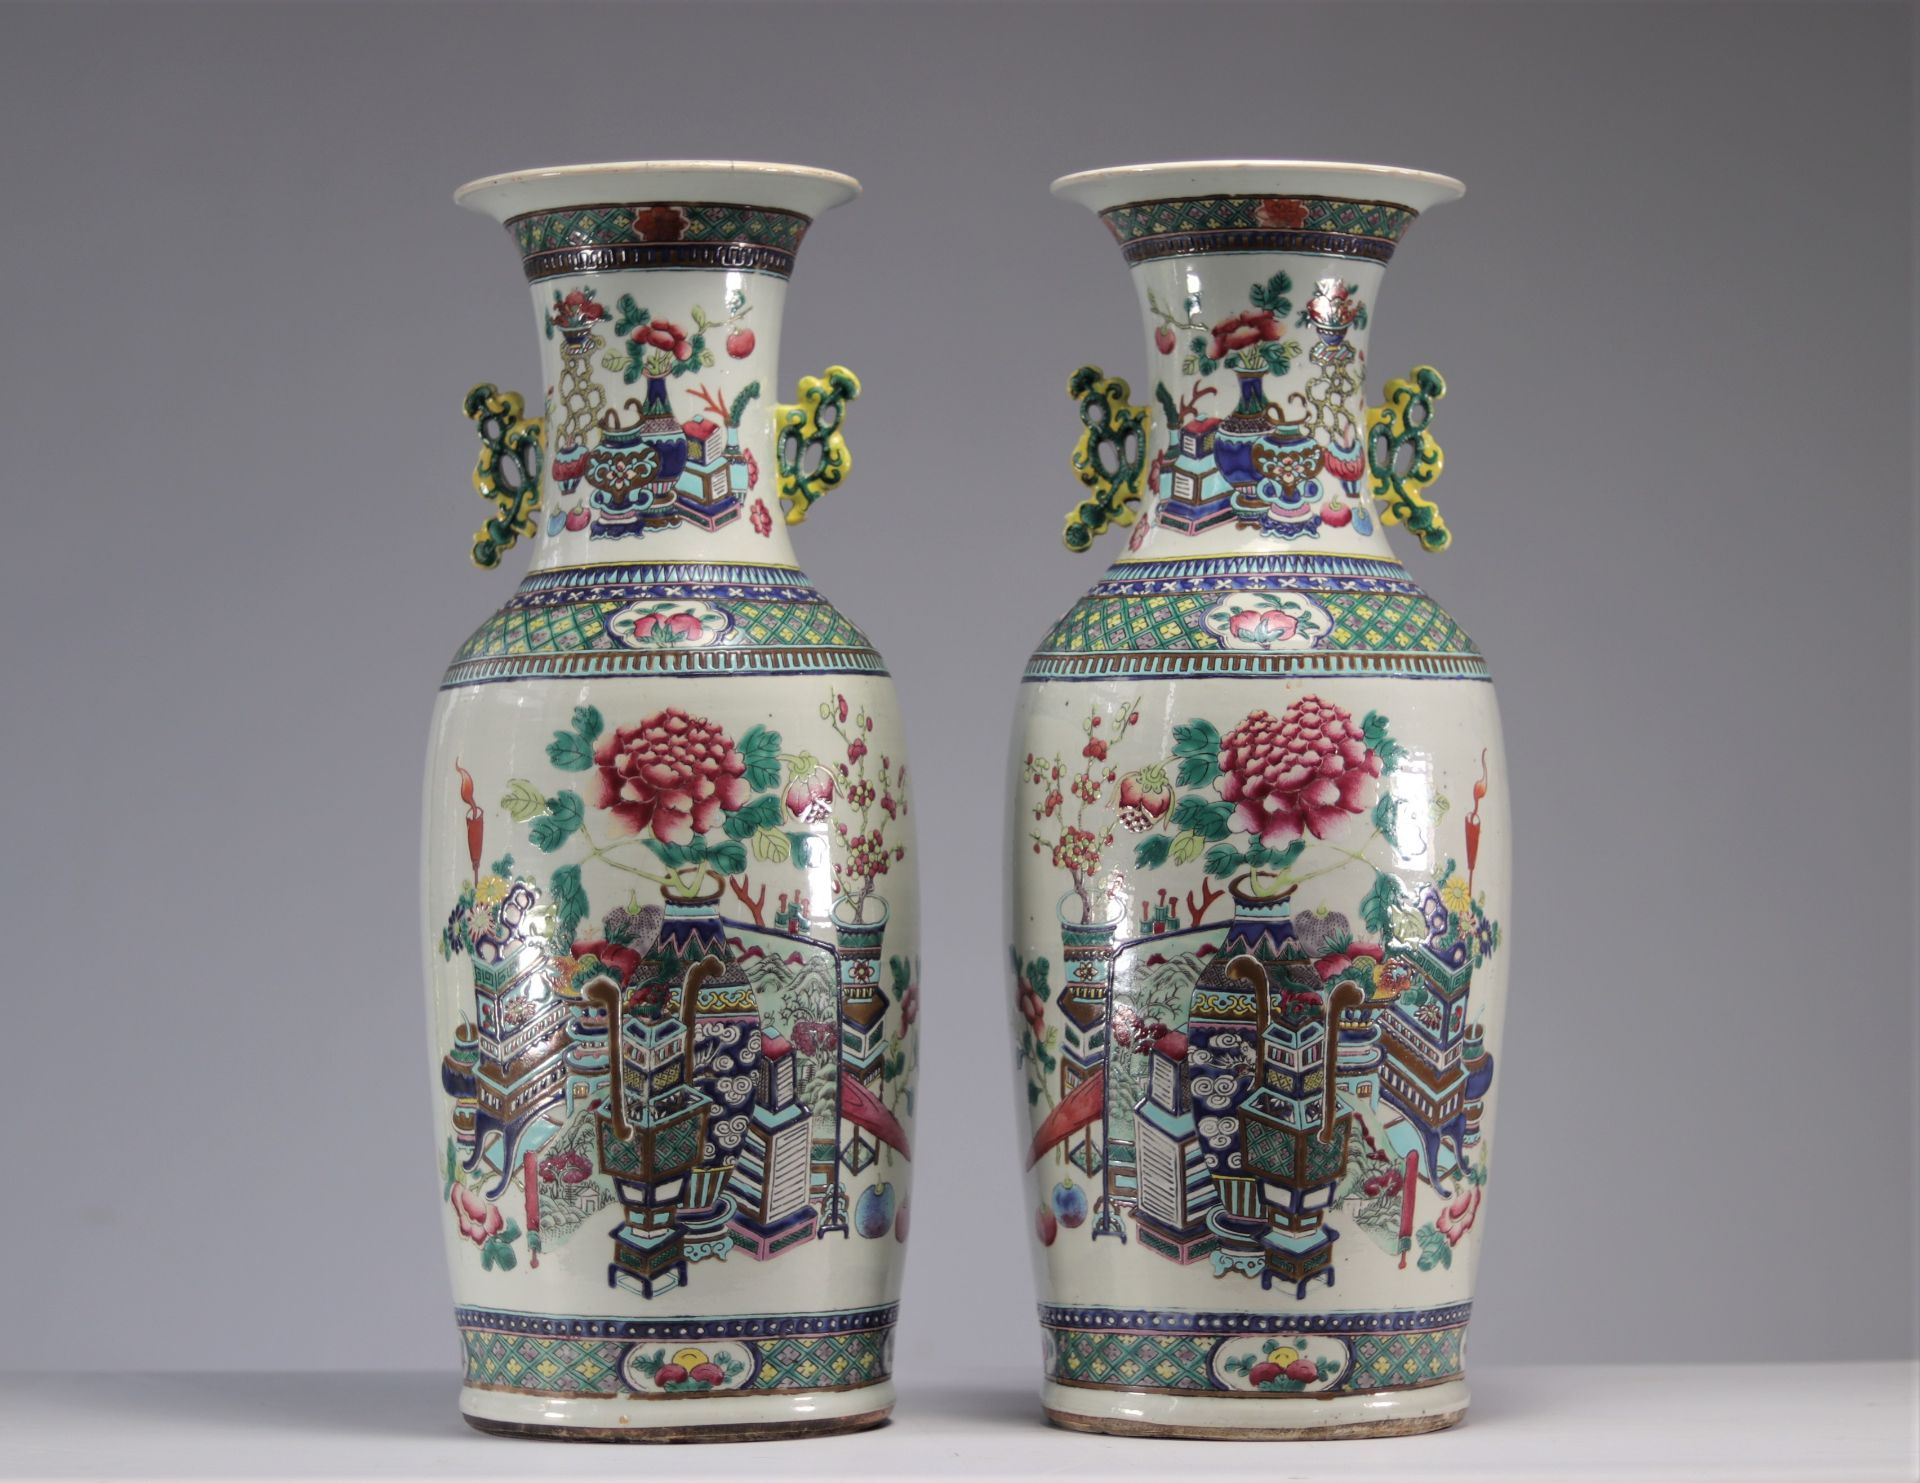 Pair of famille rose vases decorated with peacocks and furniture - Image 2 of 3